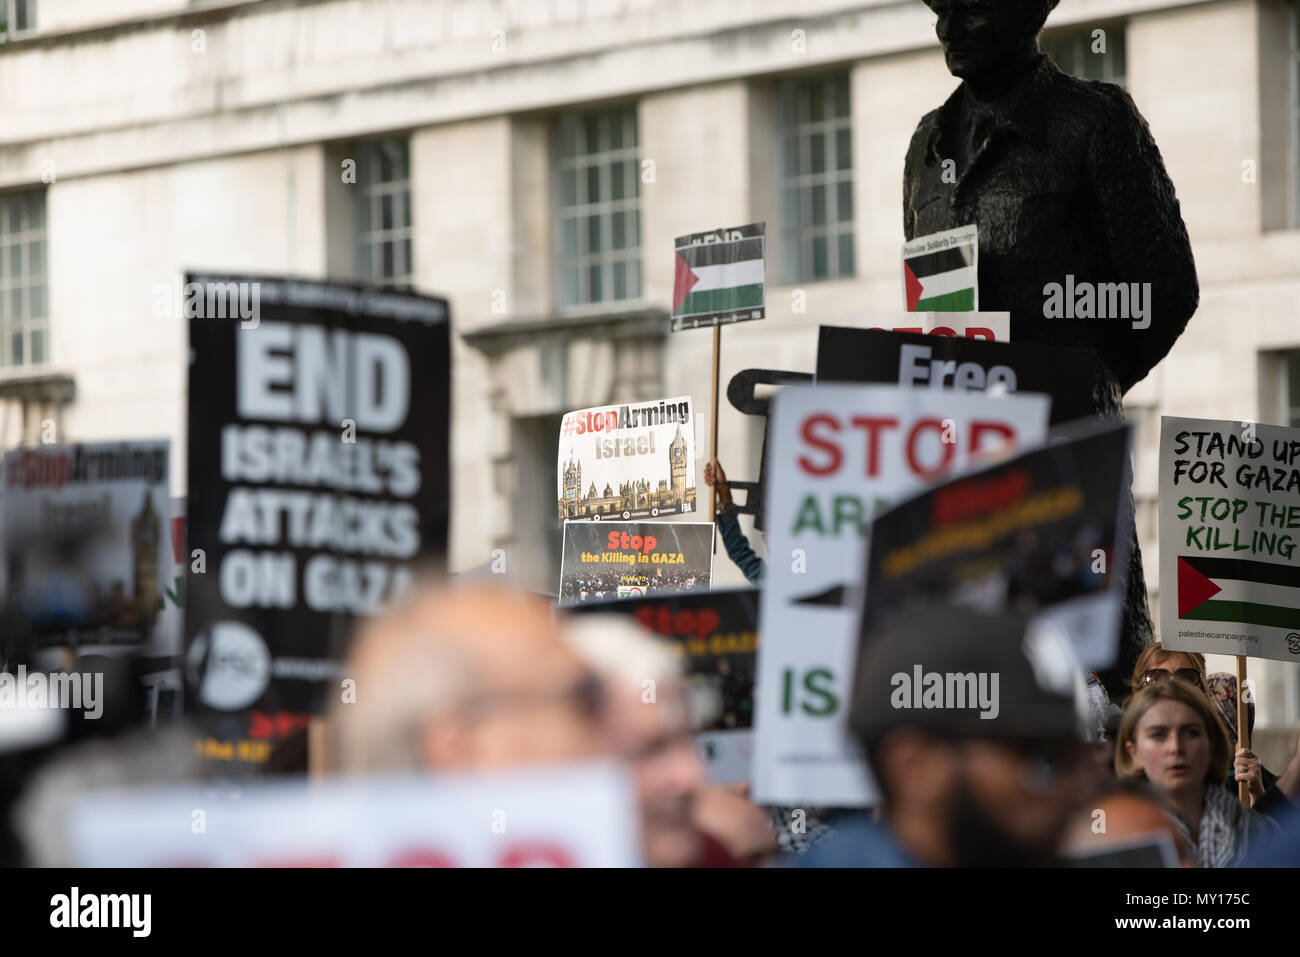 London, UK.  5 June, 2018  Demonstration outside Downing Street organised by Friends of Al Aqsa.  Demonstration organised to protest against the killing and injustice in Gaza and to stand in solidarity with the Great Return March. Stock Photo